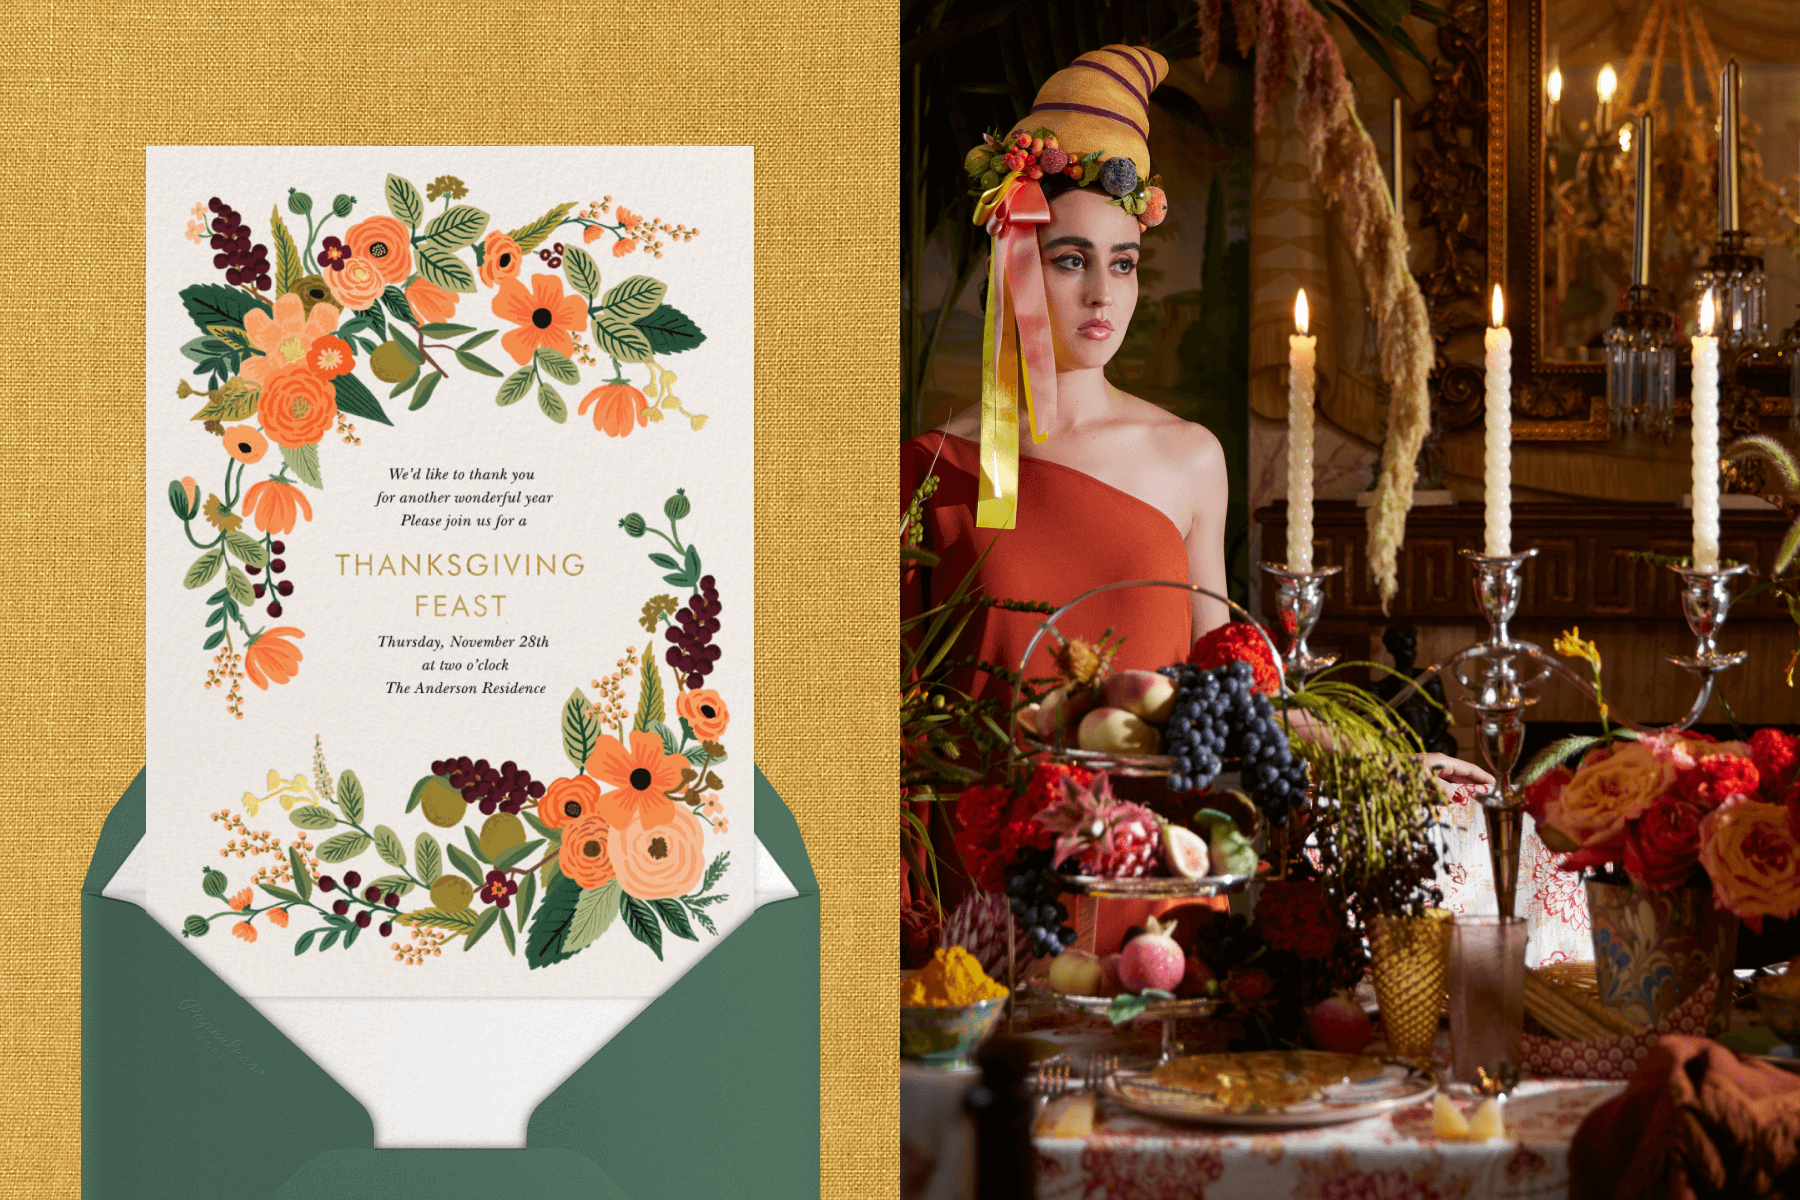 Left: A Thanksgiving invitation has a wide border of illustrated otange, purple, pink, and green florals. Right: A woman wearing a cornucopia hat stands behind a table dripping with fruit and flowers with twisted taper candles.